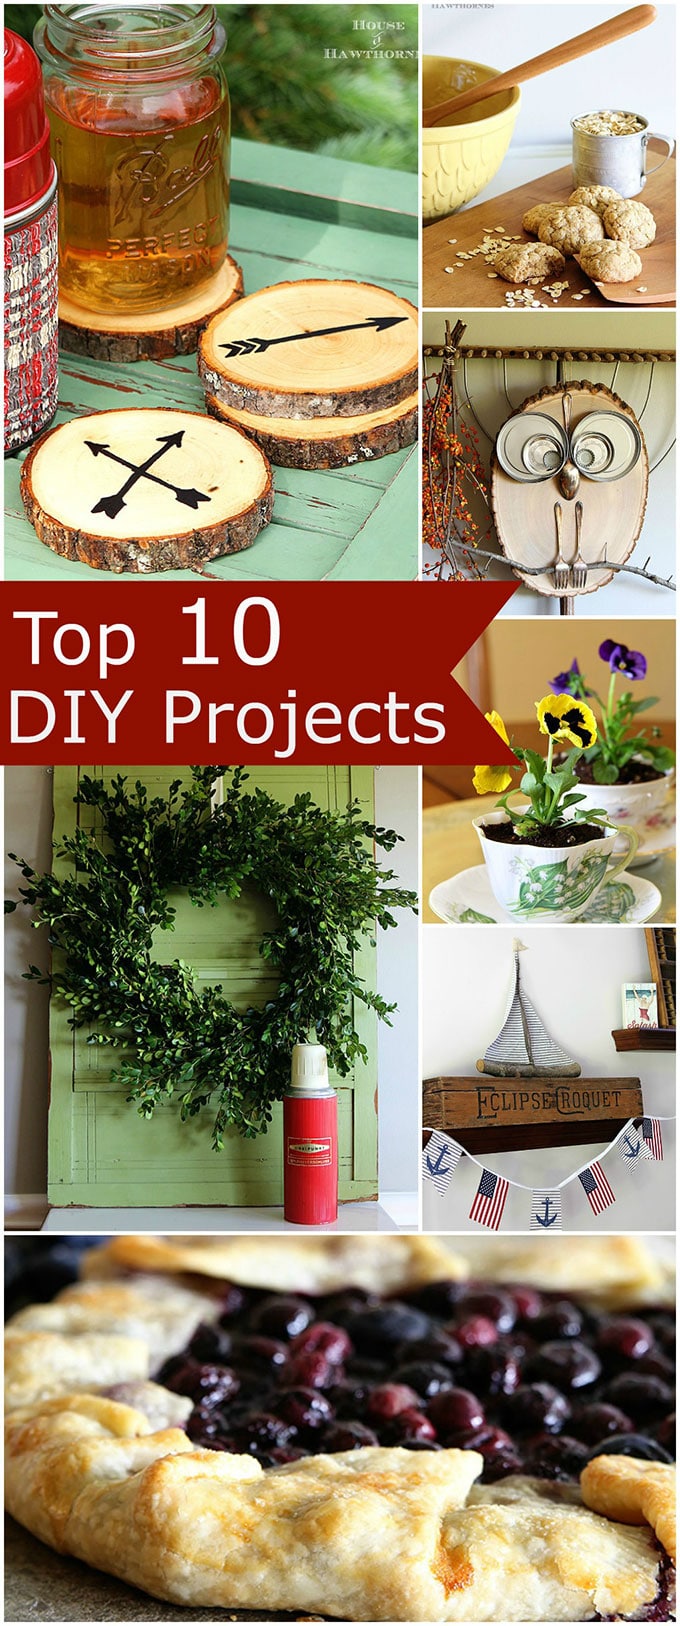 Discover the top 10 posts from the House Of Hawthornes this year, including quick and easy DIY projects, super simple recipes, holiday projects and more.